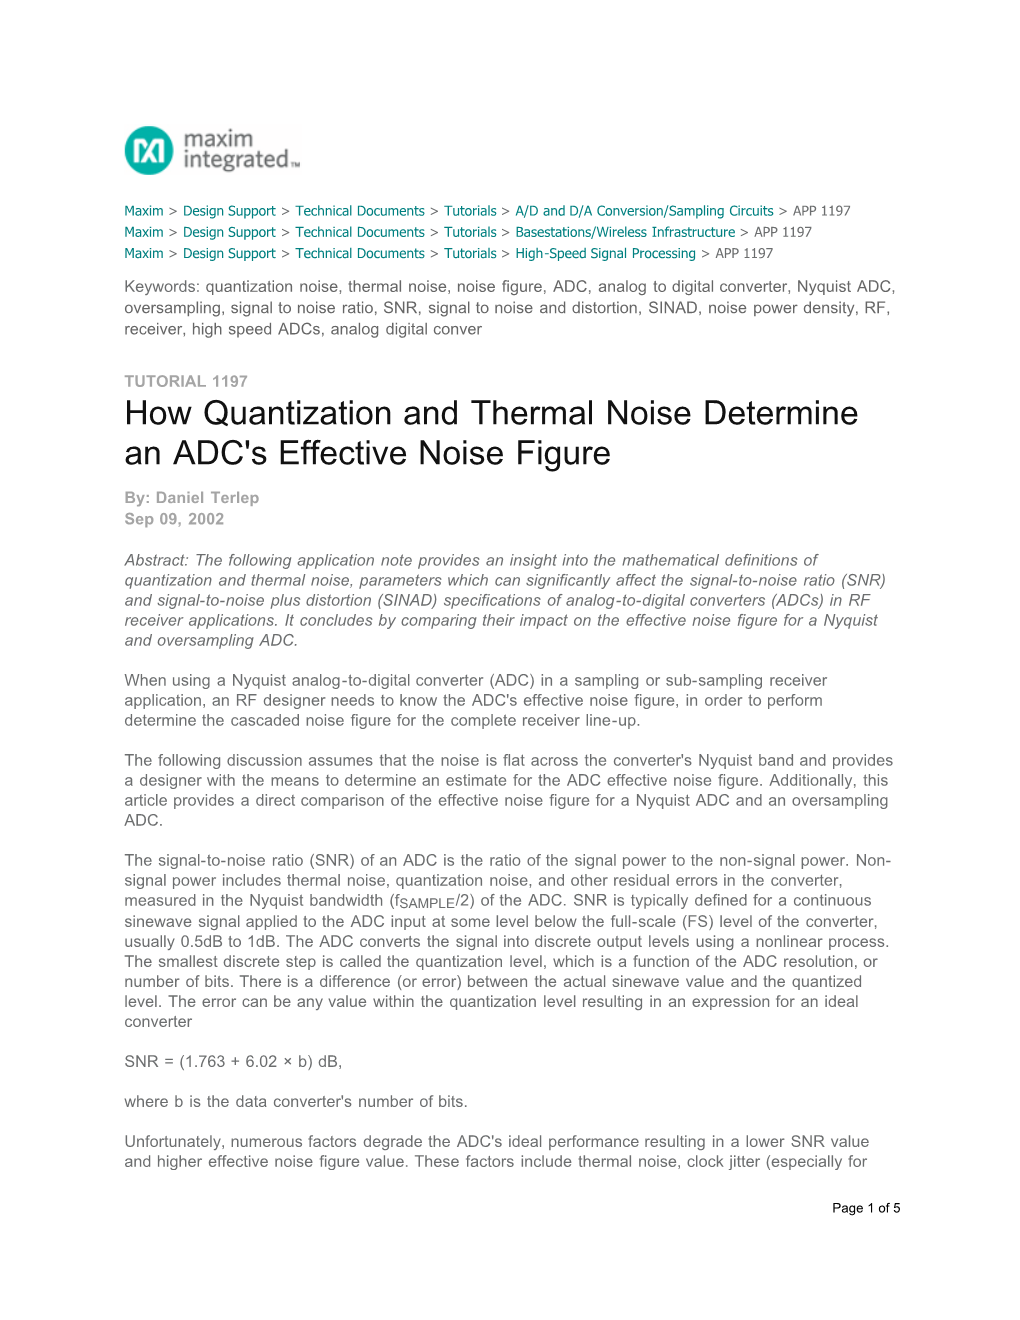 How Quantization and Thermal Noise Determine an ADC's Effective Noise Figure